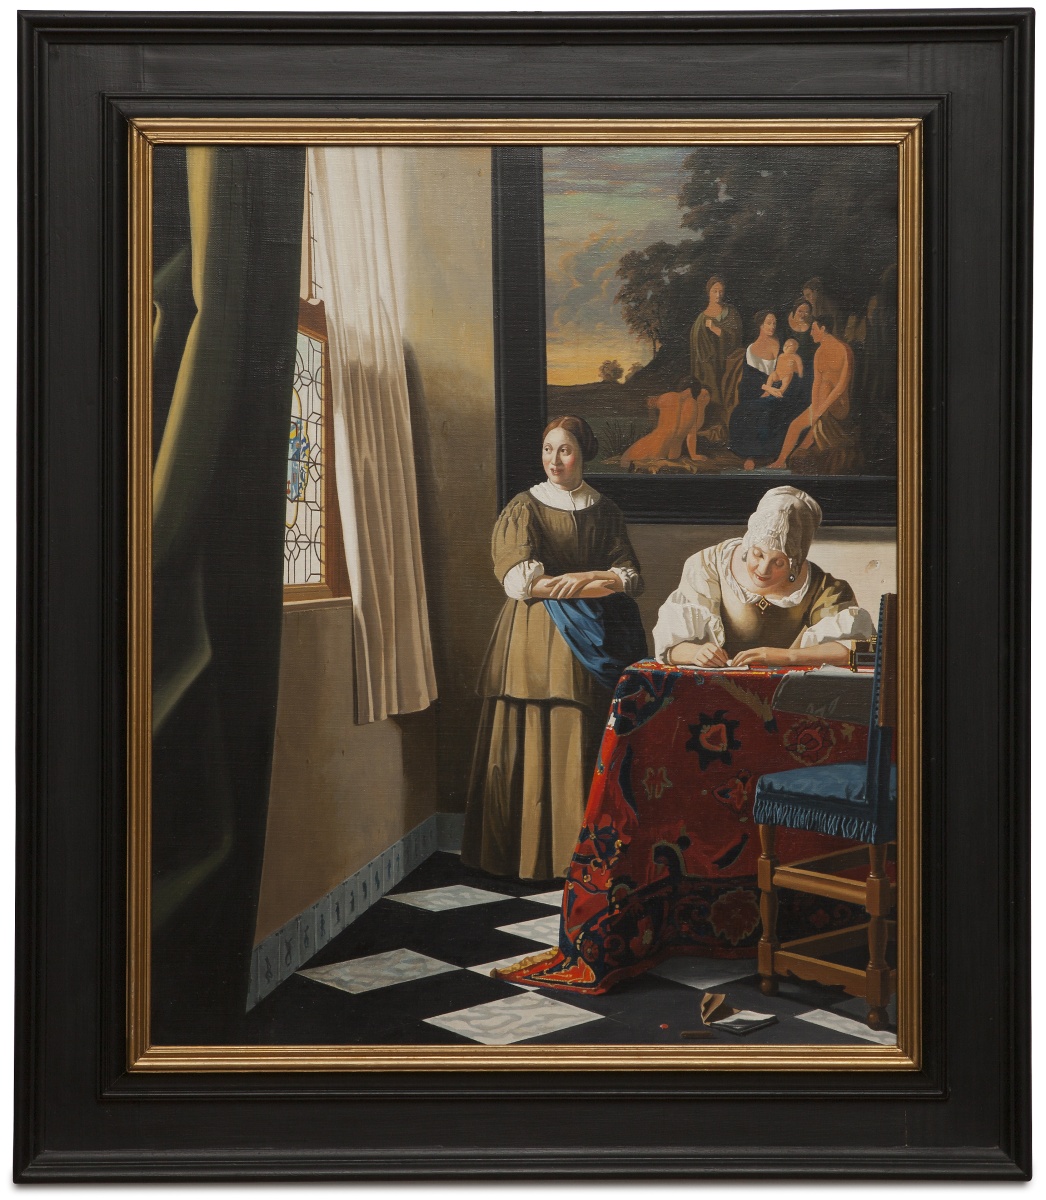 Lady writing a letter with her maid - Scrittrice con la fantesca cm 73x61